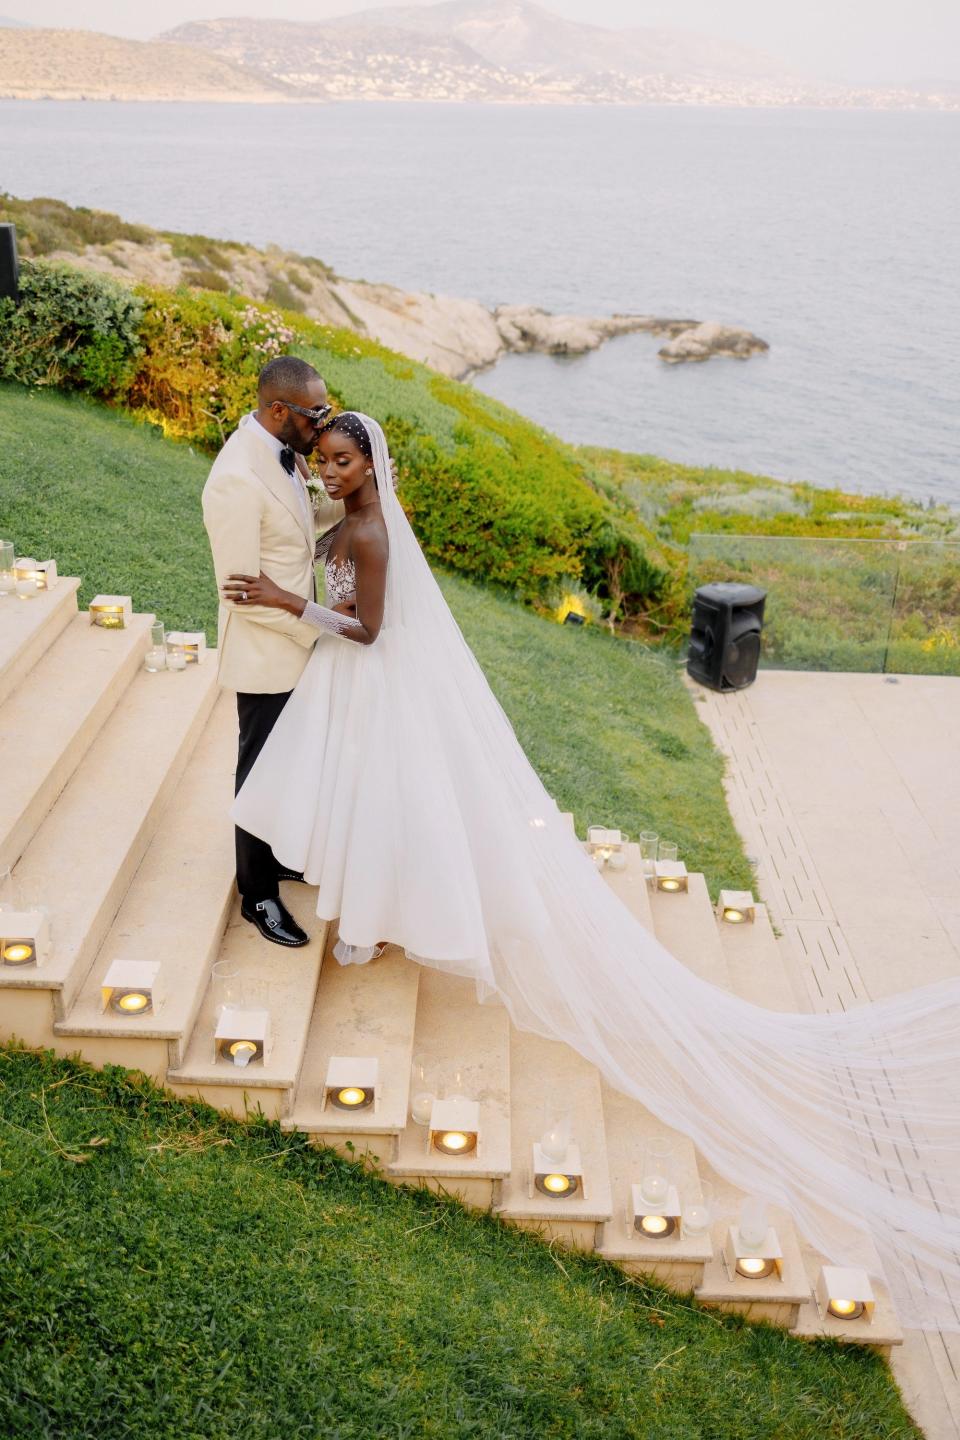 A bride and groom embrace on a staircase with an ocean in the backdrop.